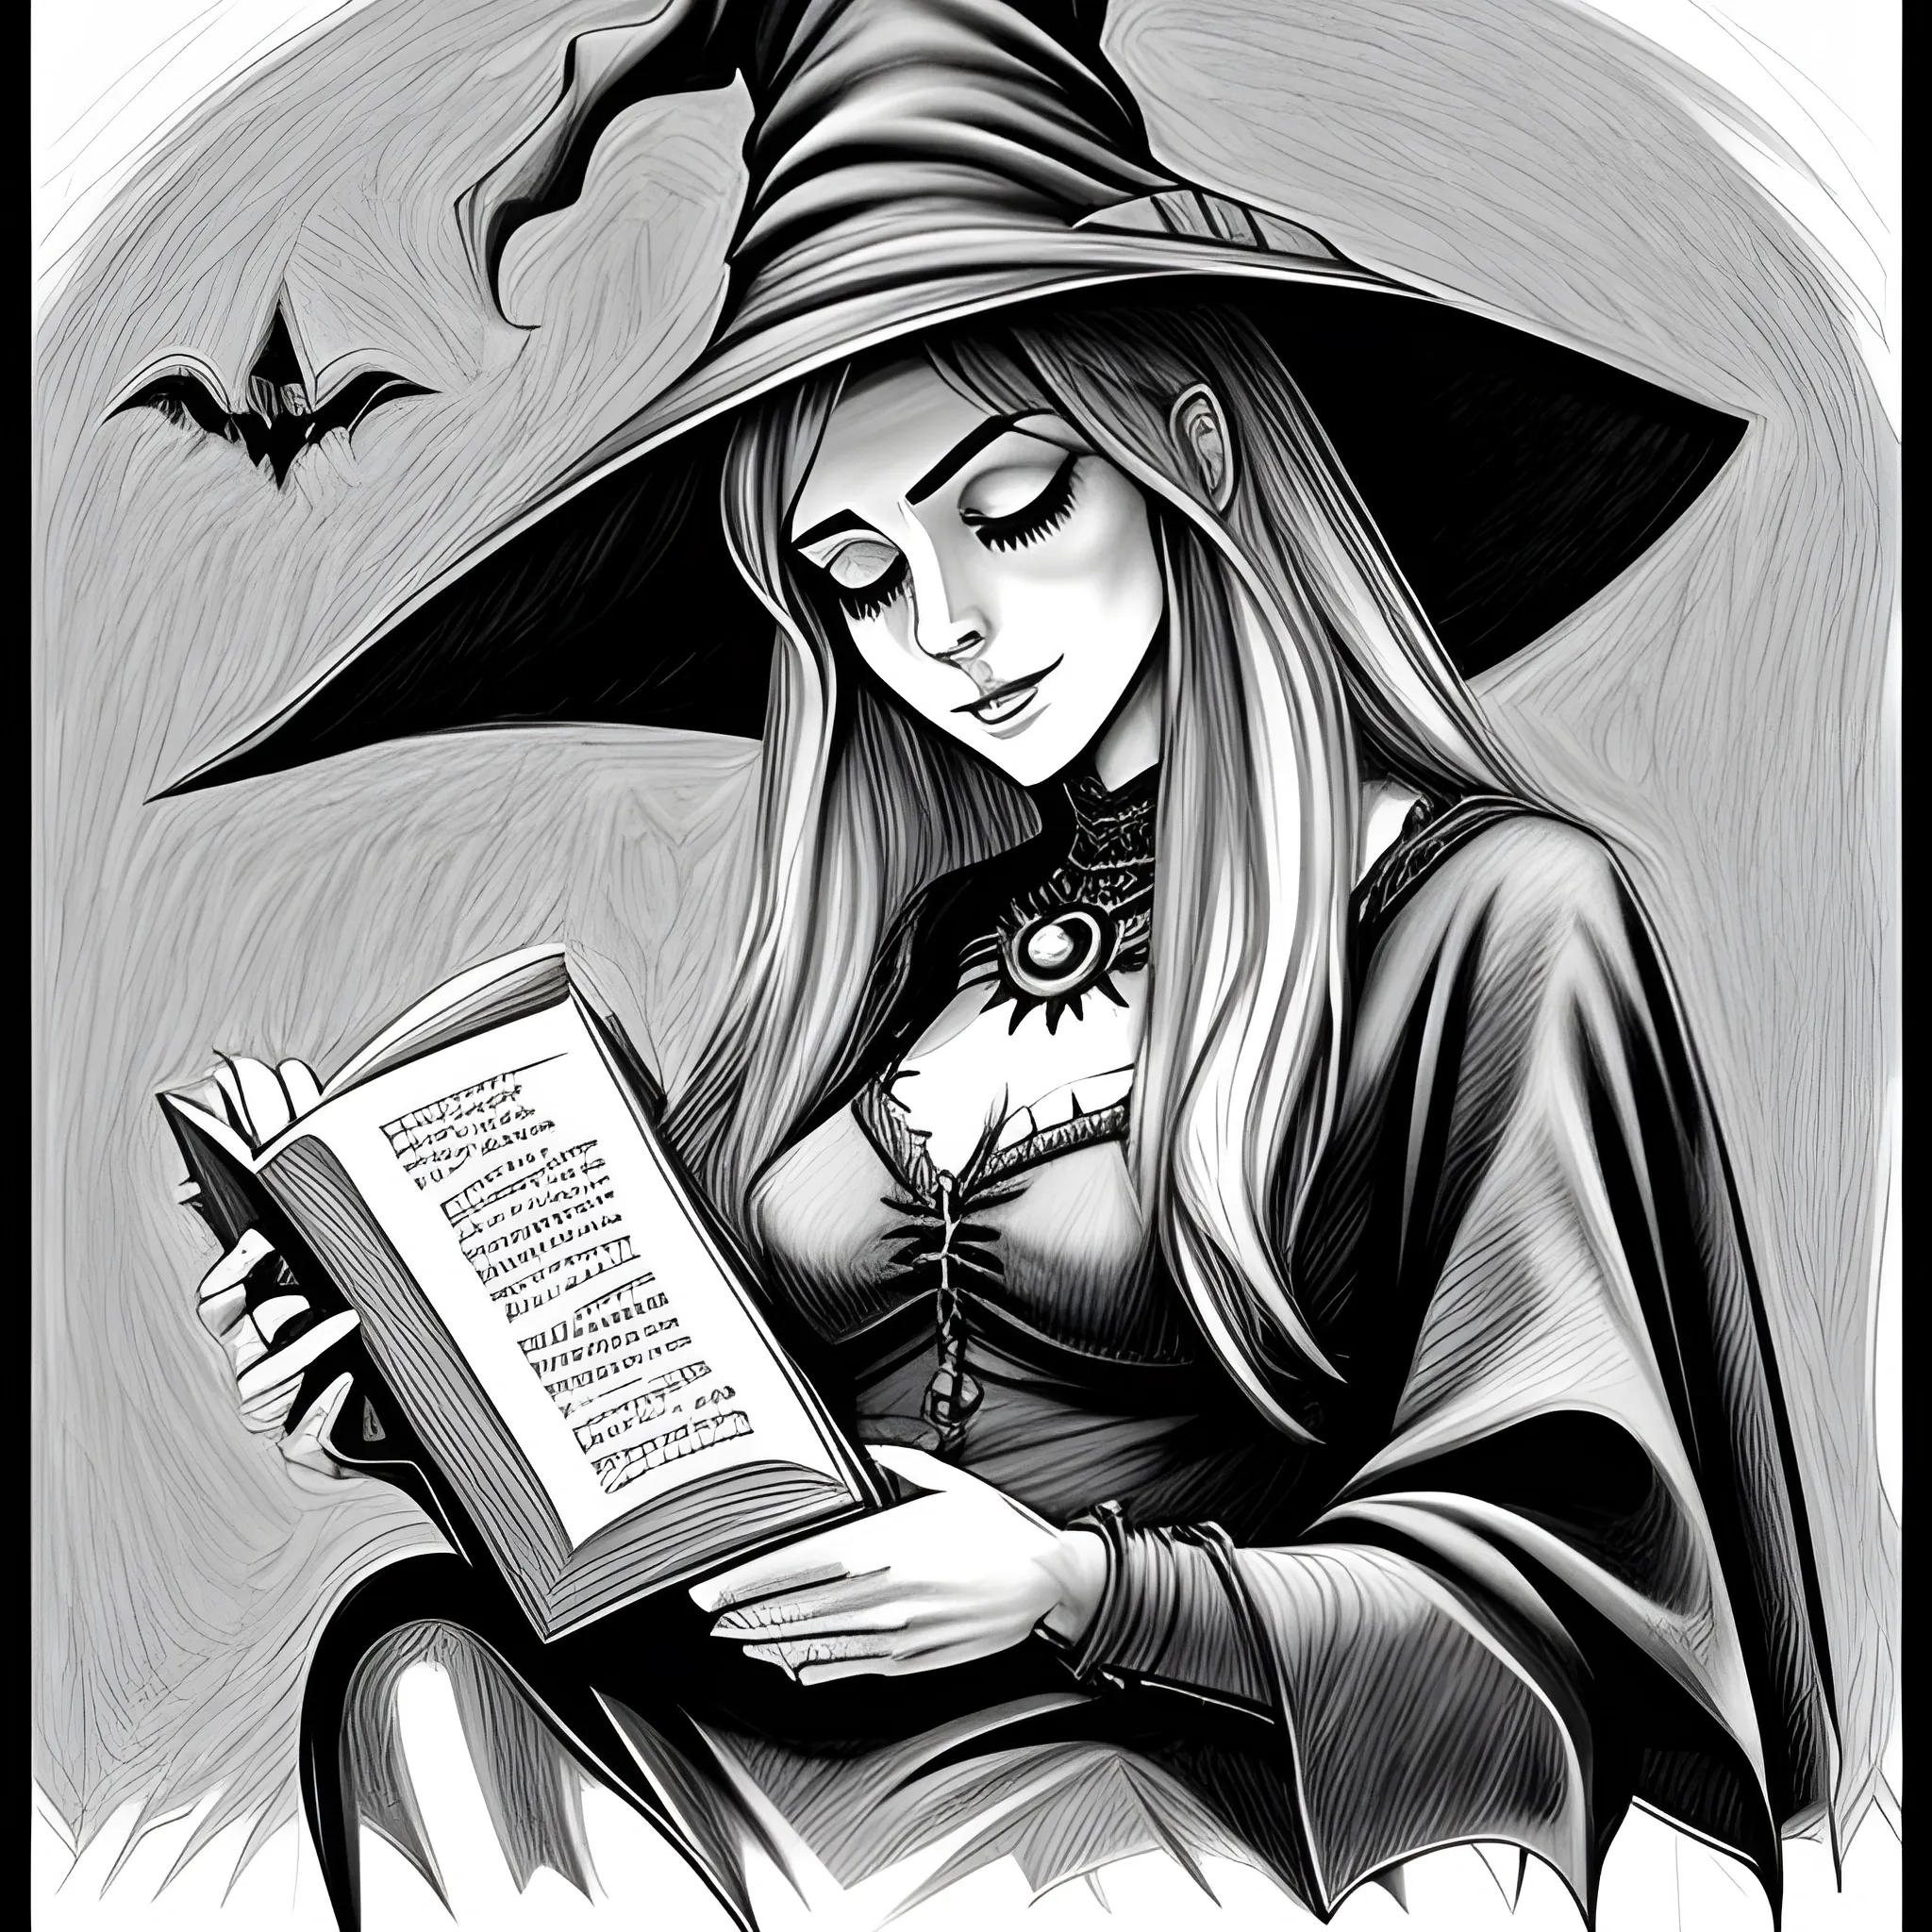 magna art style pencil sketch witchy woman reading a book